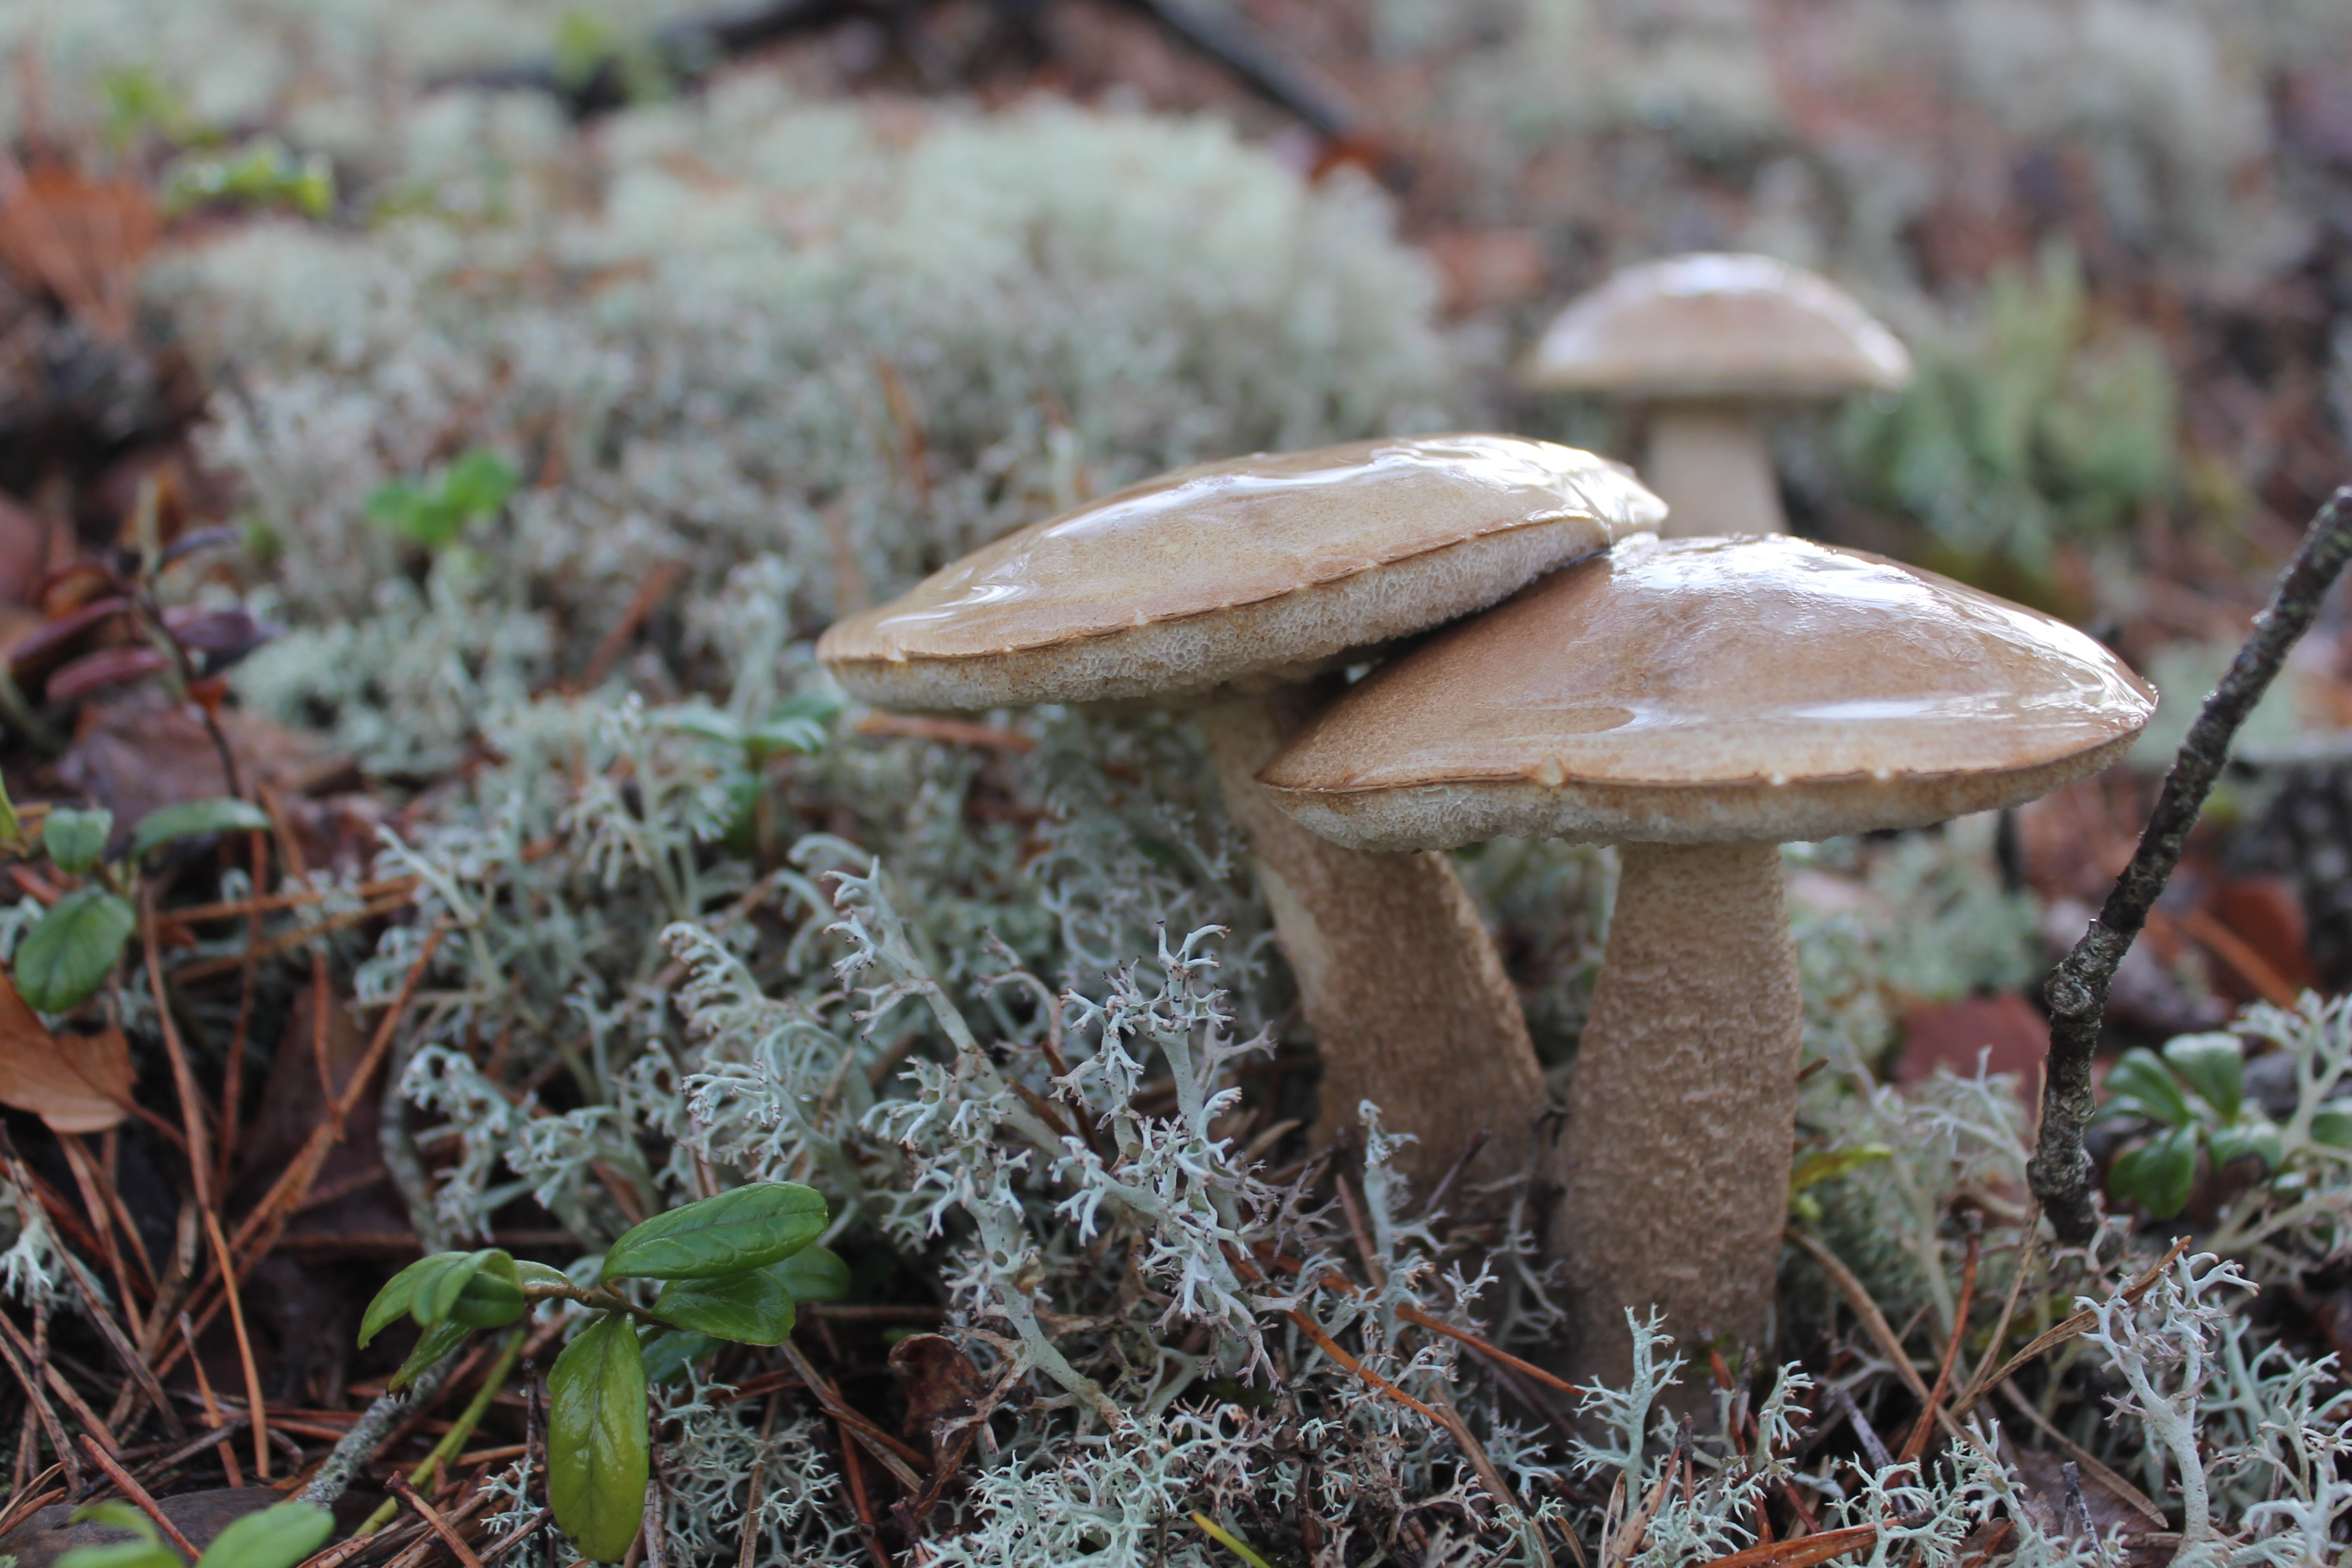 MAGIC MUSHROOMS STOPS PEOPLE FEELING LEFT OUT